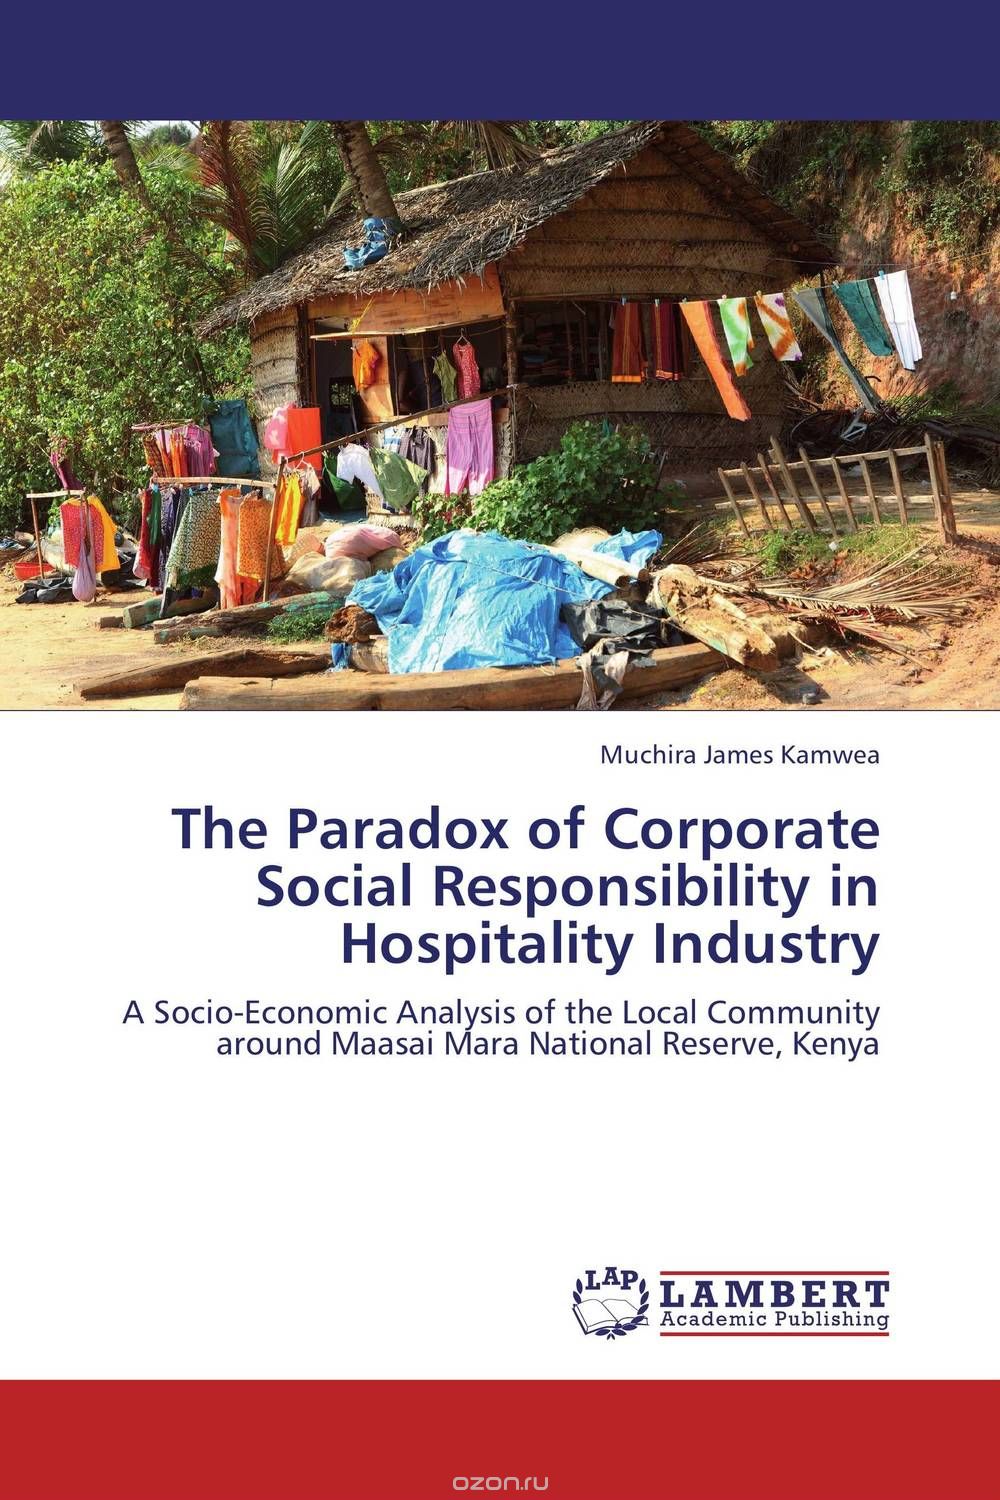 Скачать книгу "The Paradox of Corporate Social Responsibility in Hospitality Industry"